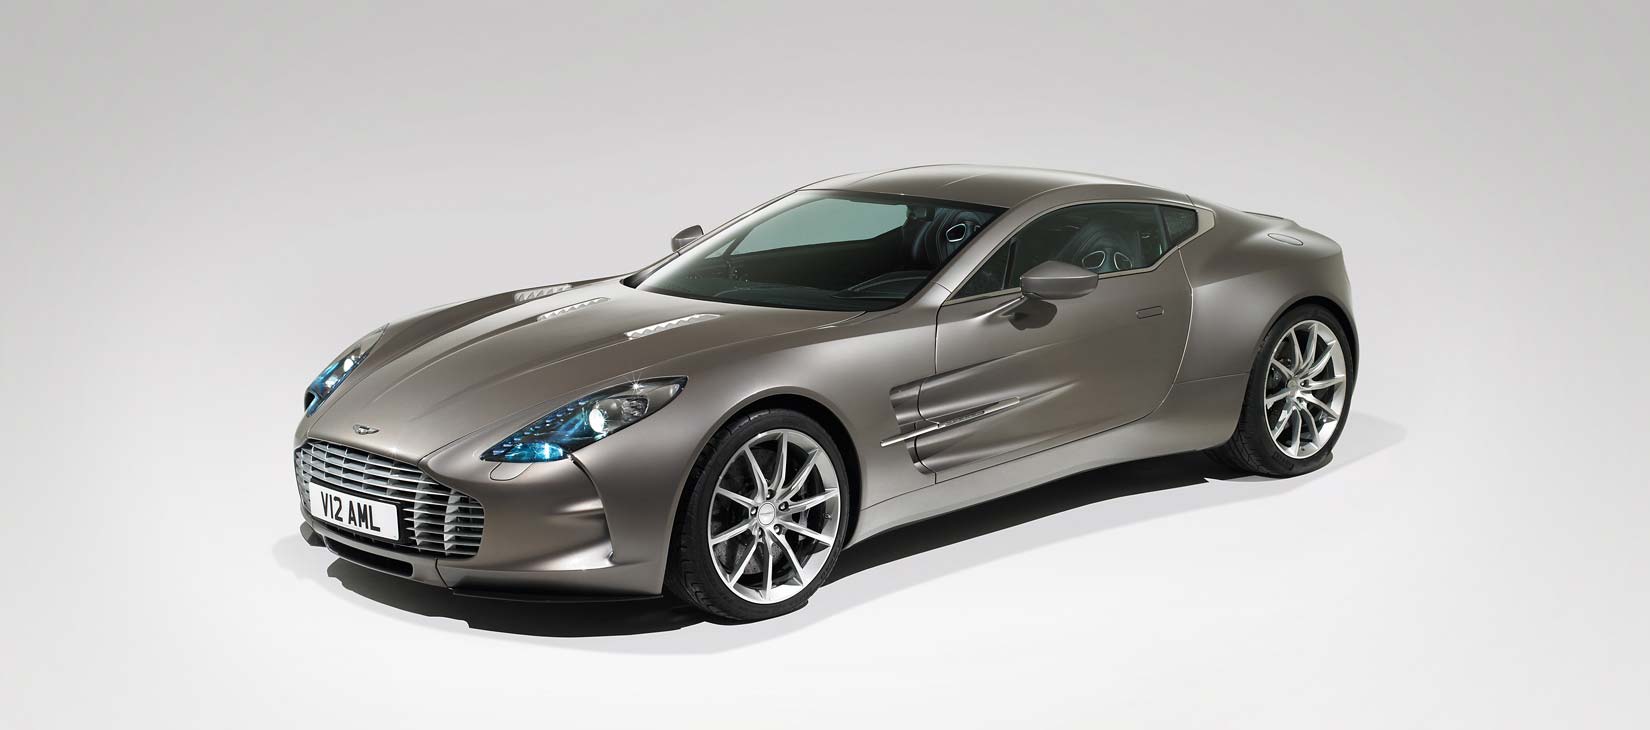 Nice Images Collection: Aston Martin One-77 Desktop Wallpapers